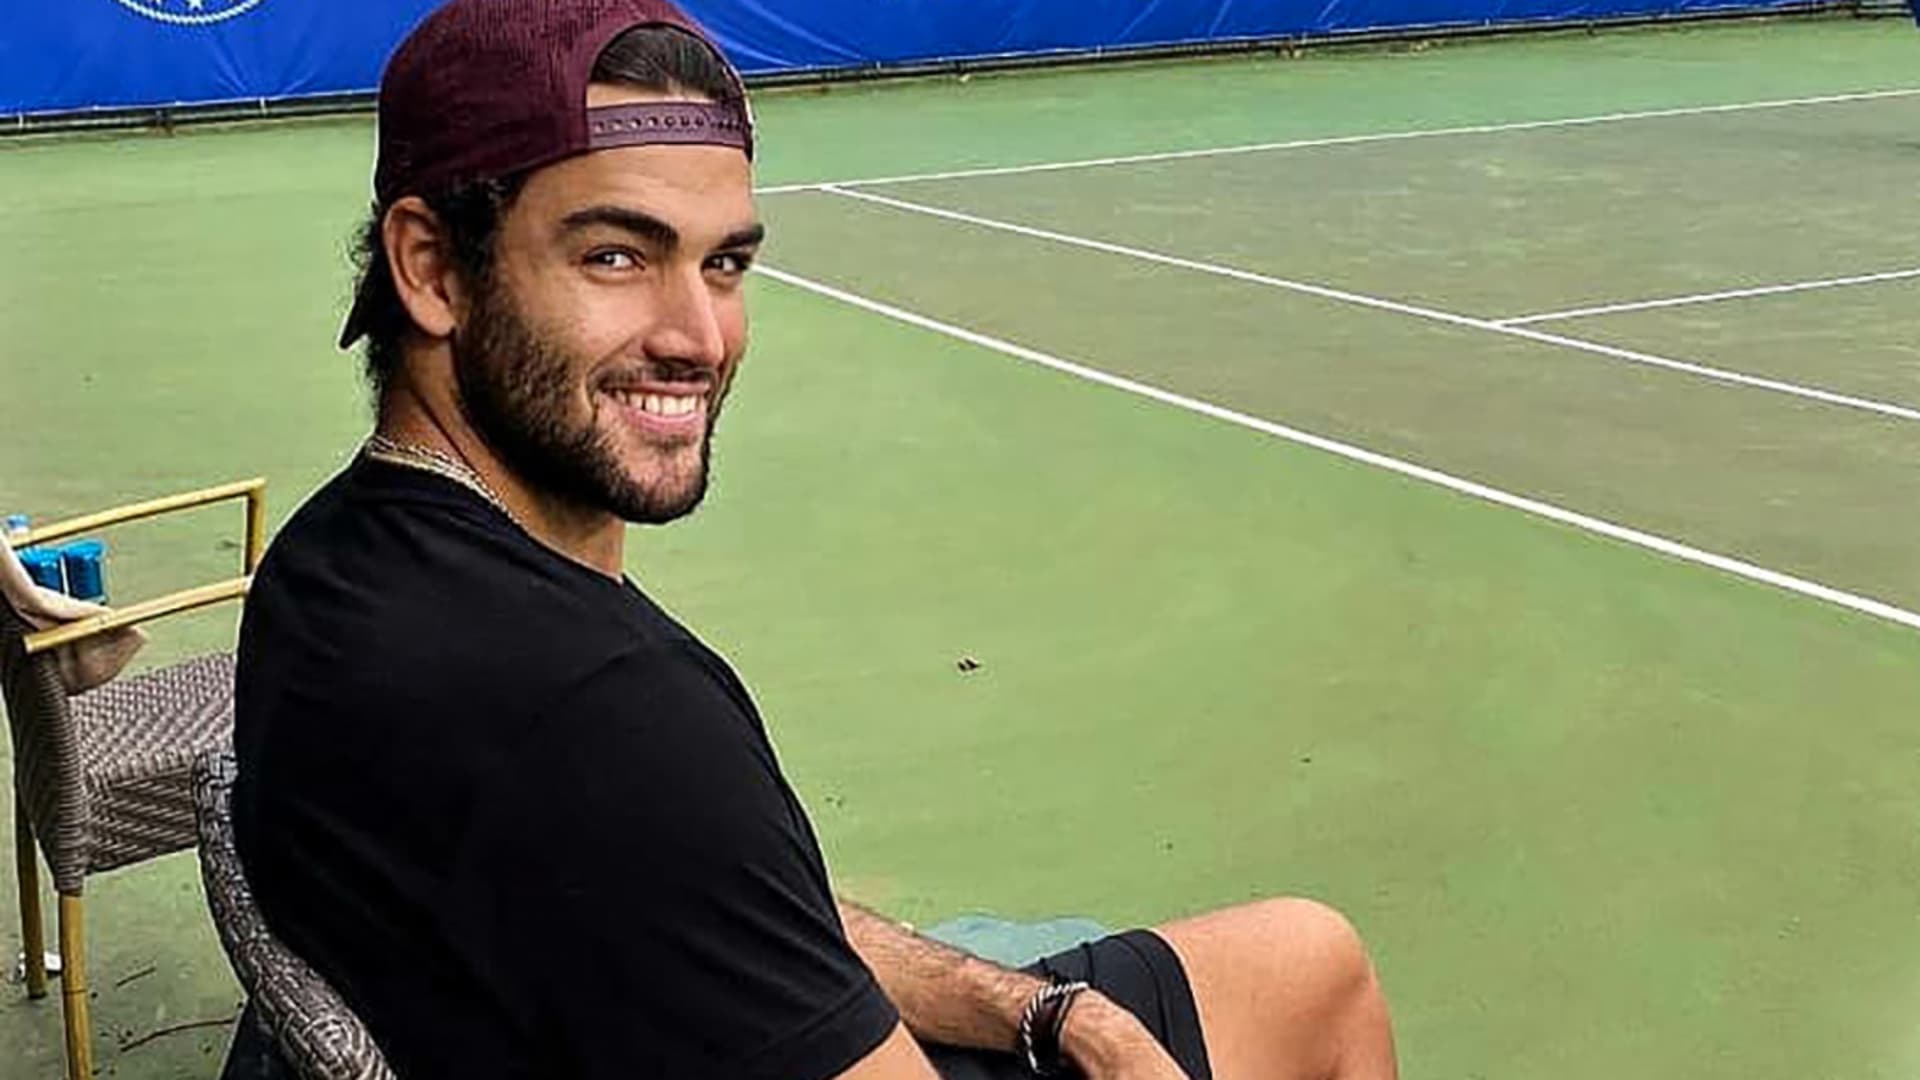 Healthy Berrettini at home in Antalya—site of his first ranking points